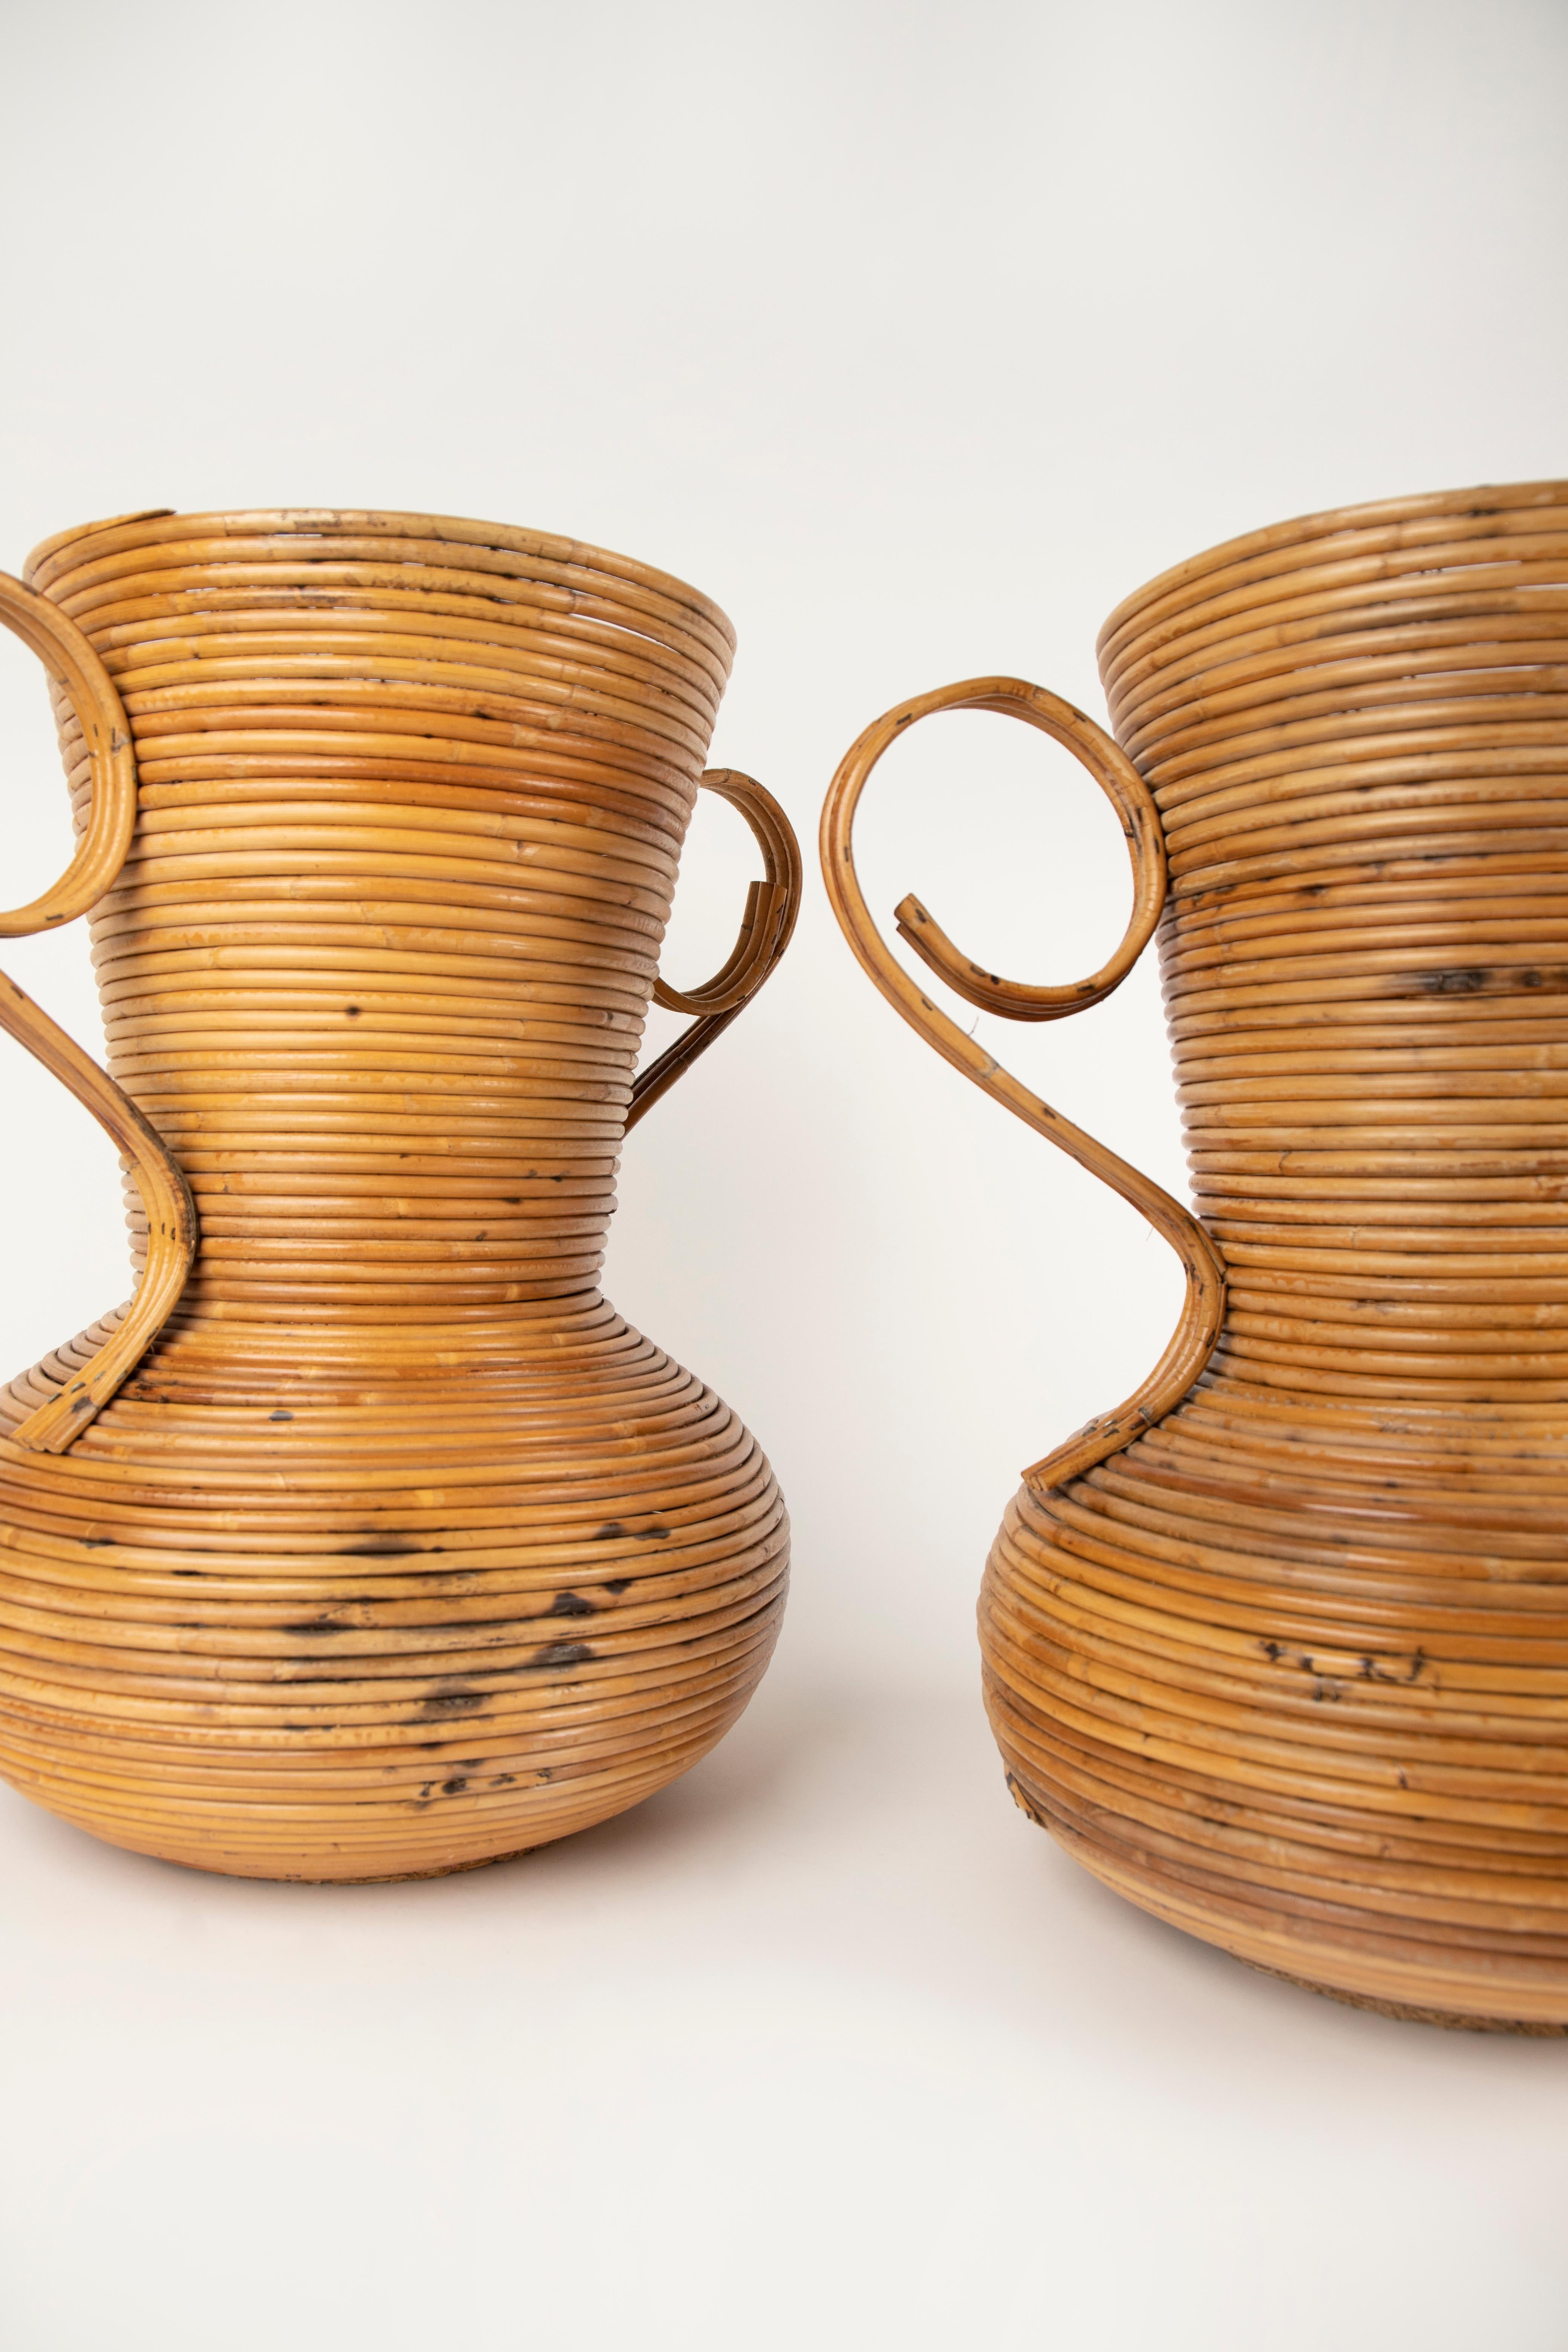 Pair of Rattan Amphoras Vases by Vivai del Sud, Italy 1960s For Sale 4